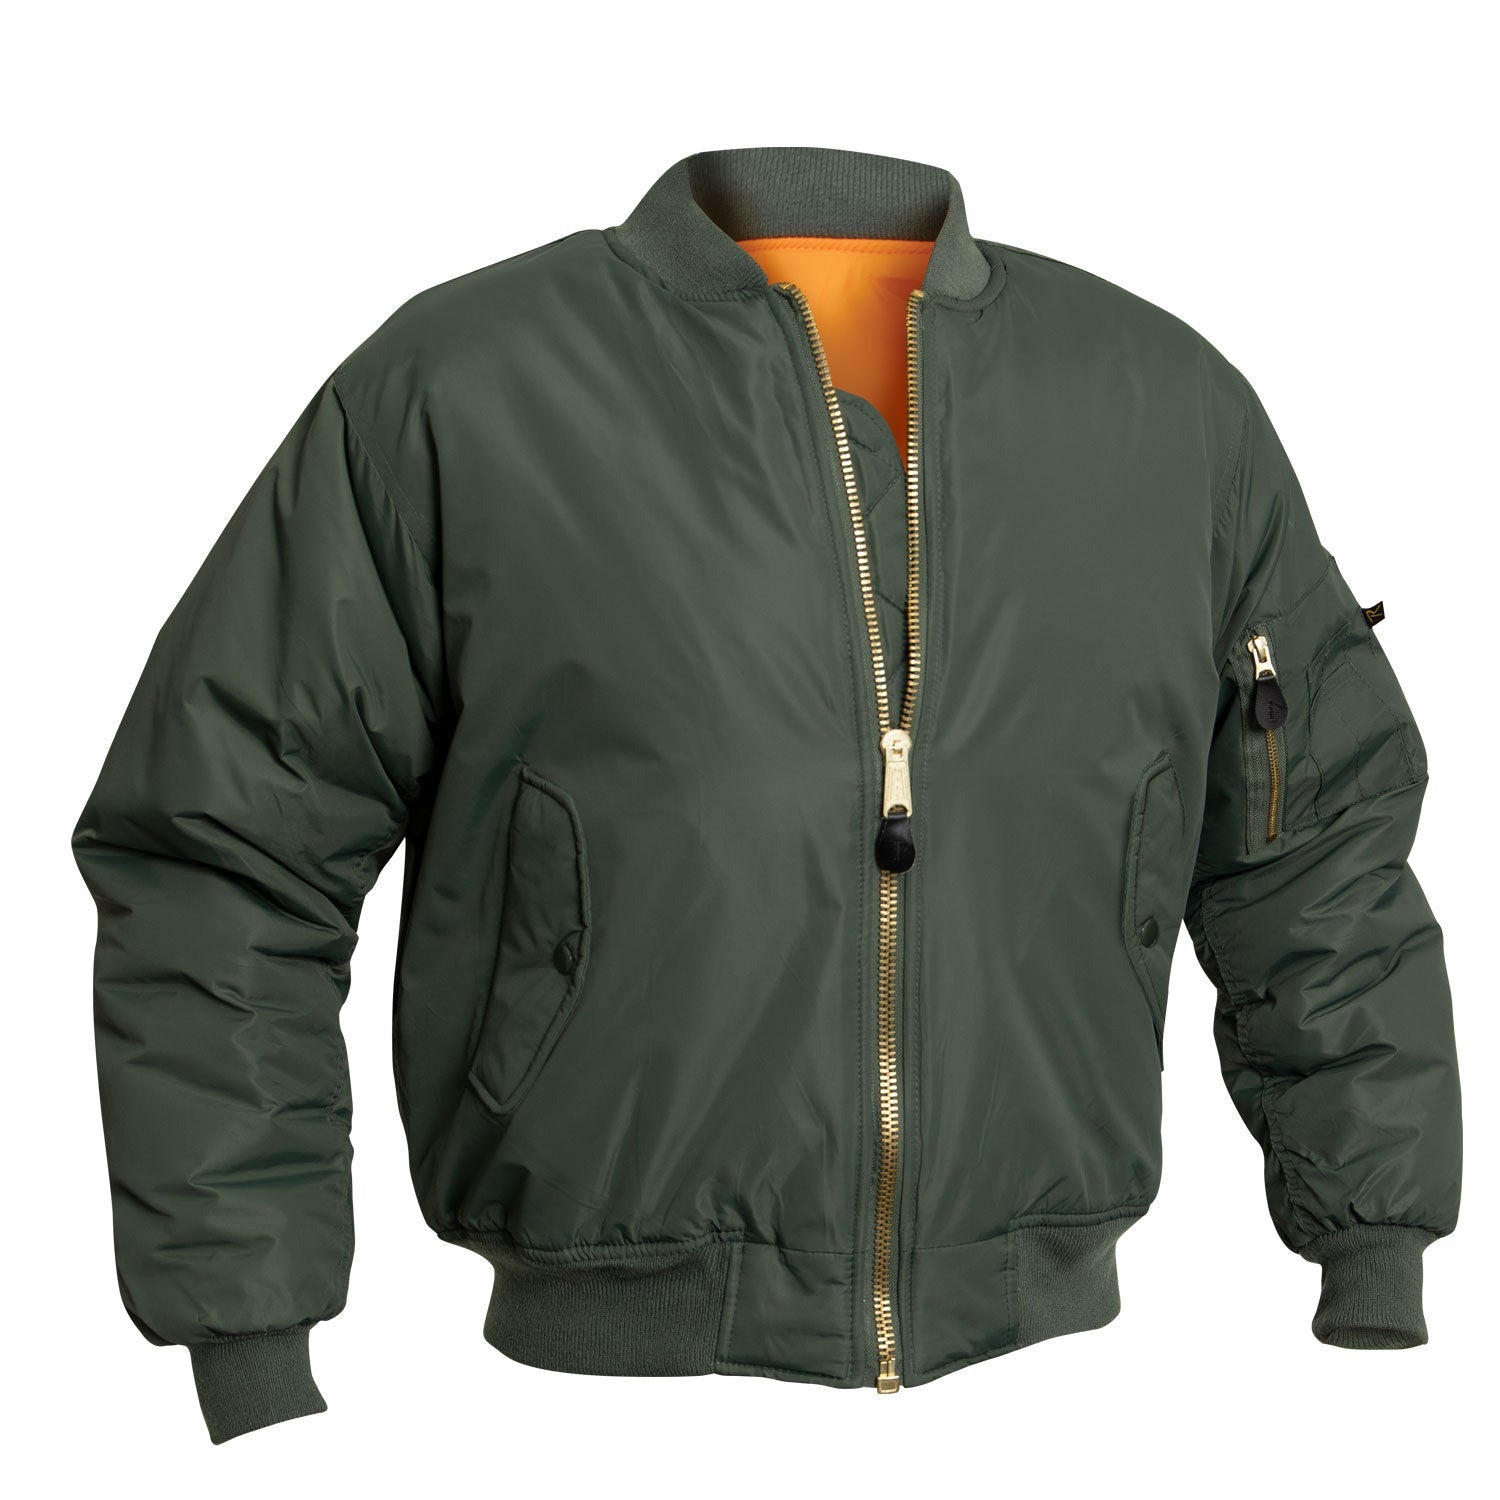 We took our classic MA-1 Flight Jacket and added an enhanced Nylon Outershell - offering maximum protection from the elemen